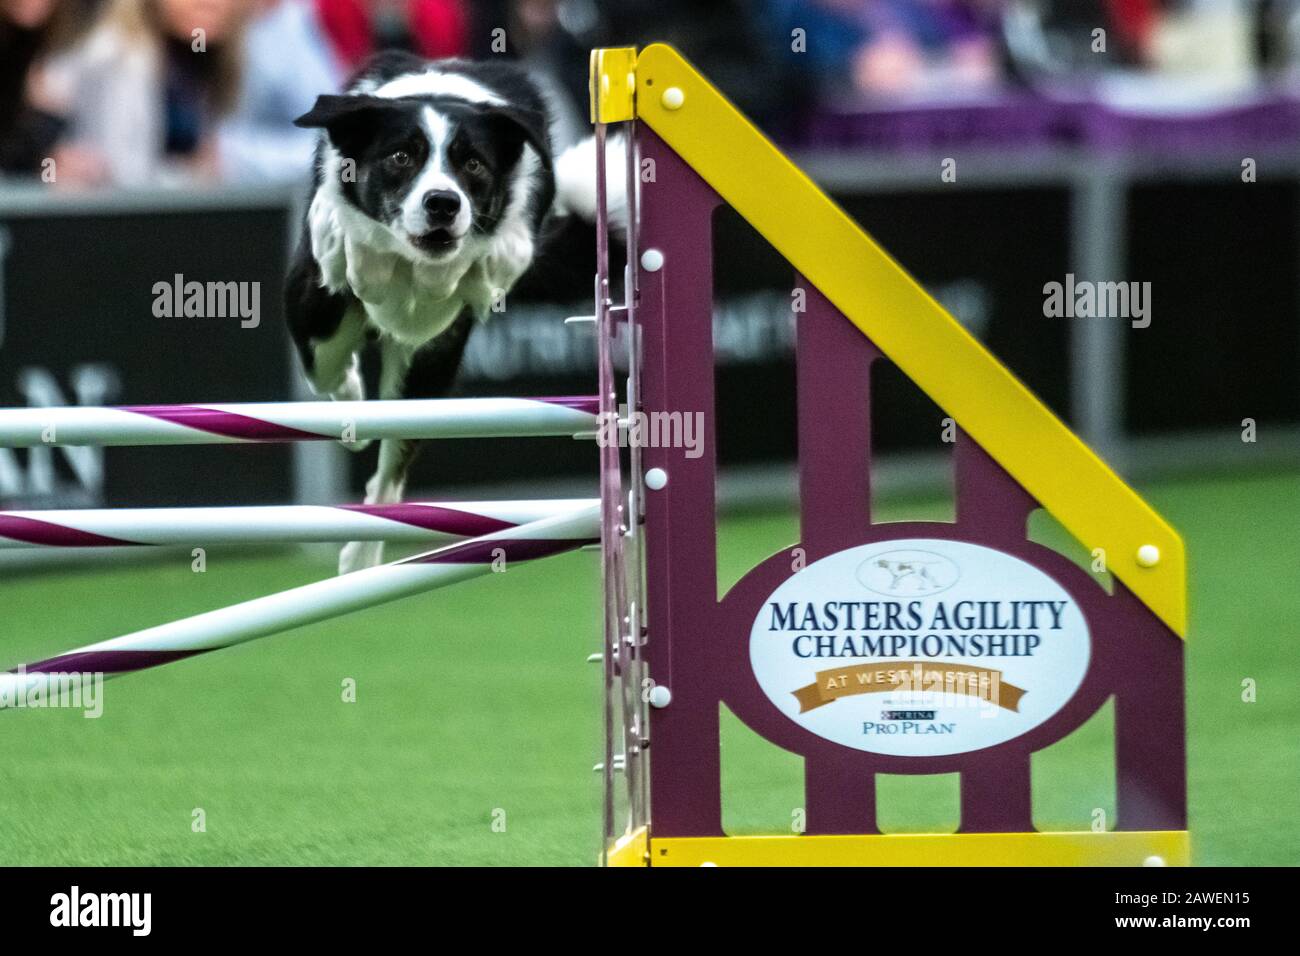 New York, USA. 8th Feb, 2020. Whit, a Border Collie, clears an obstacle during the qualifying round of The Westminster Kennel Club Dog show Masters Agility Championship in New York city. Credit: Enrique Shore/Alamy Live News Stock Photo